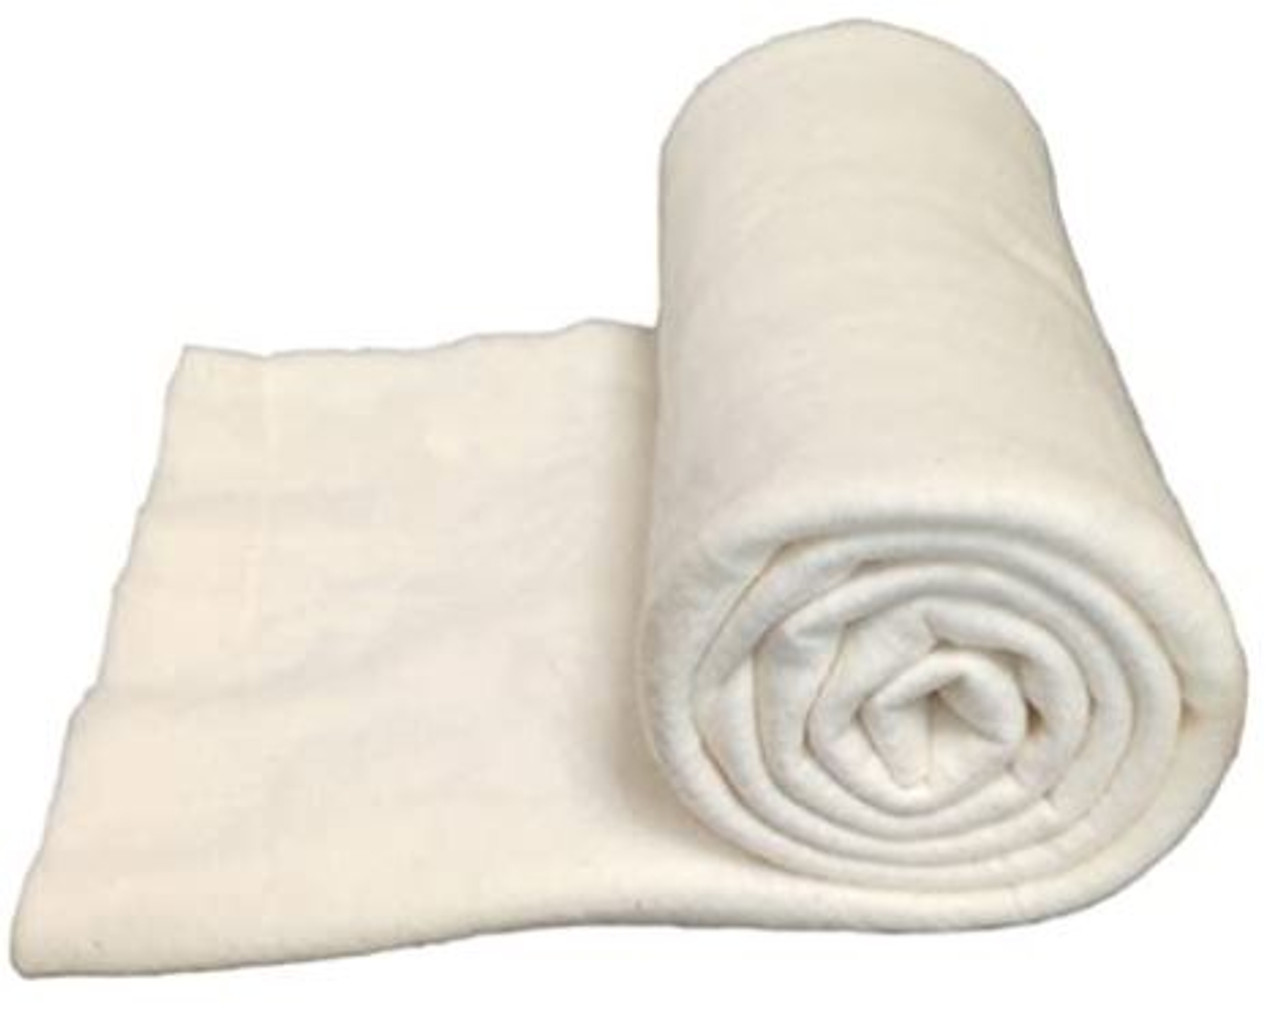 EBC60 Elegant Bleached Cotton Batting (Package, Throw (2) 60 in x 60 in)  shipping included*